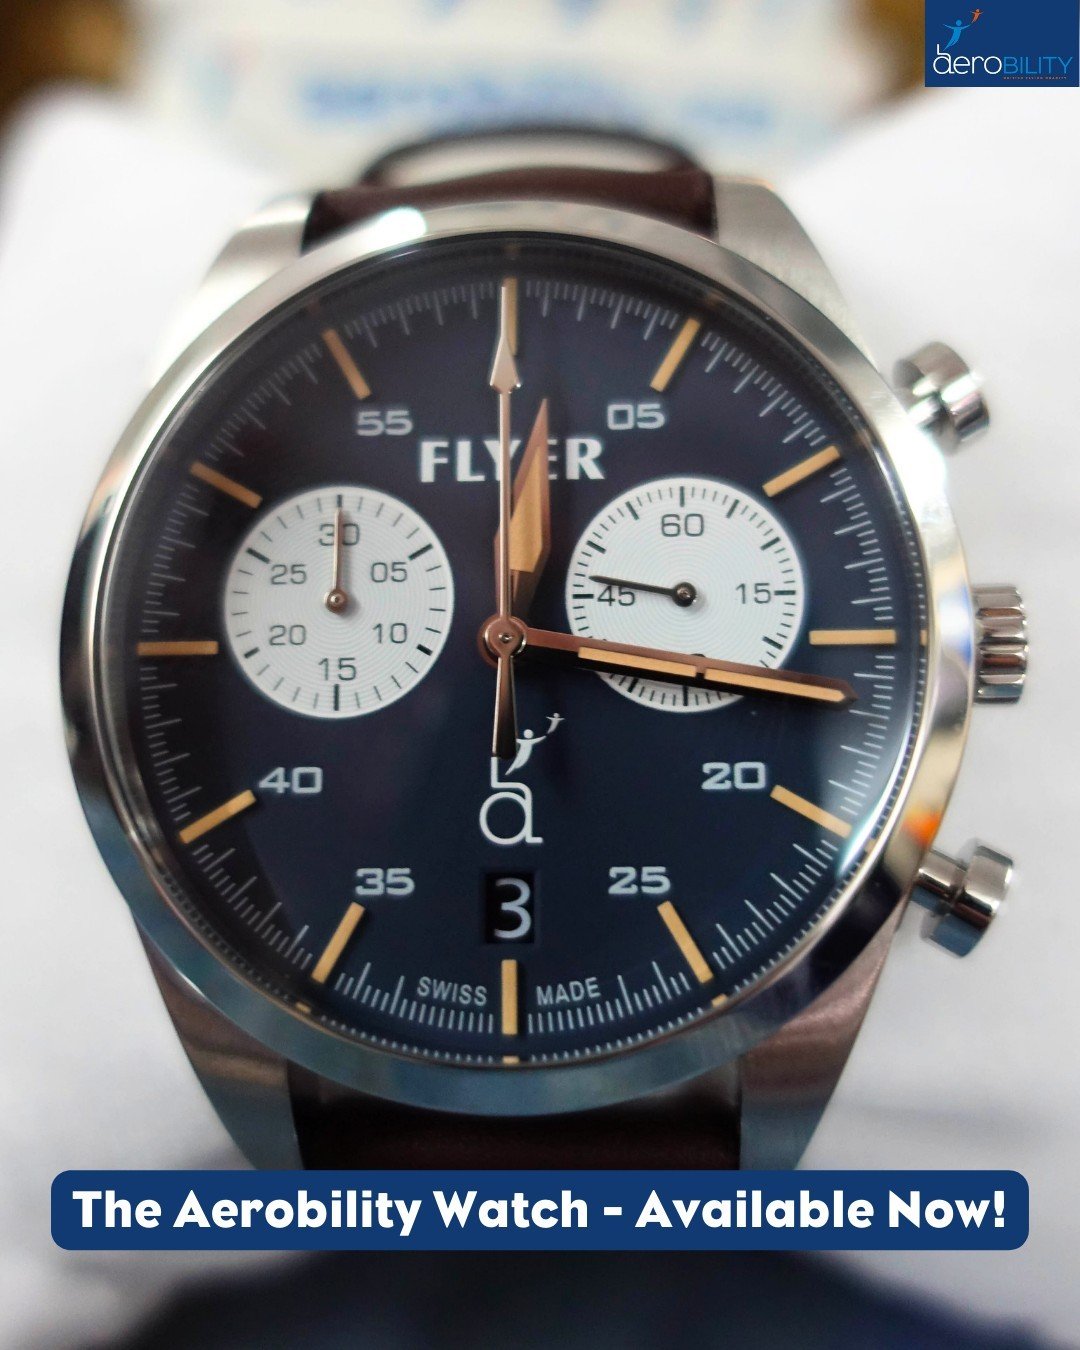 Have you seen the Aerobility watch in partnership with @flyerwatches? 😮

The Aerobility watch boasts a Swiss-made chronograph movement, a 42mm stainless steel case, a genuine brown padded leather strap, date indication, and 100m water resistance, en